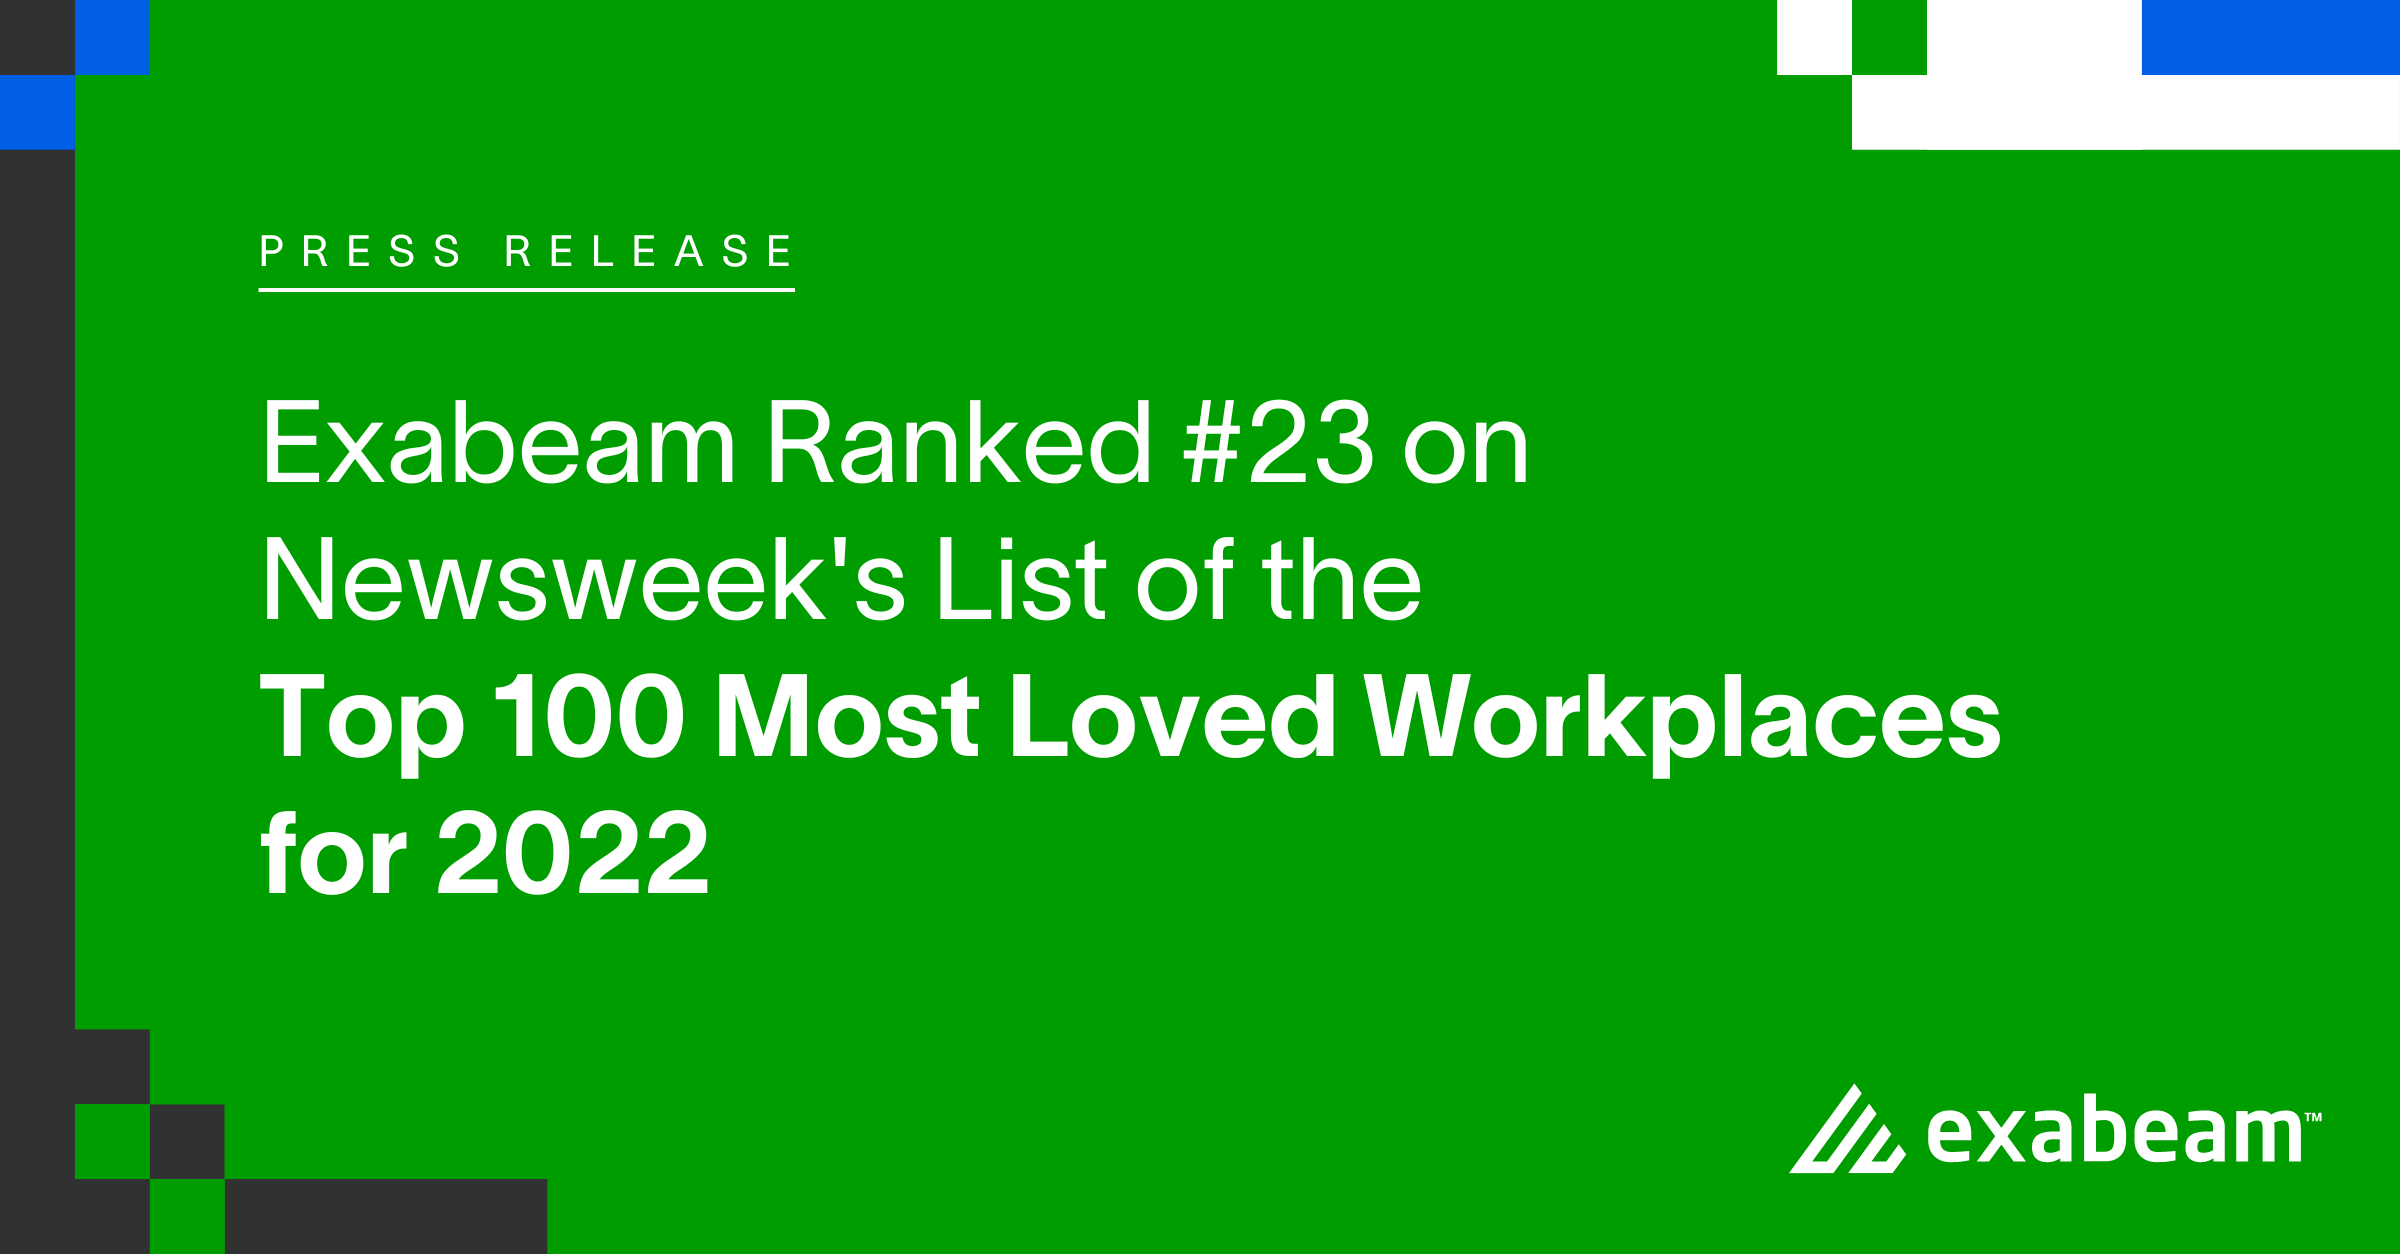 Exabeam Ranked #23 on Newsweek's List of the Top 100 Most Loved Workplaces for 2022